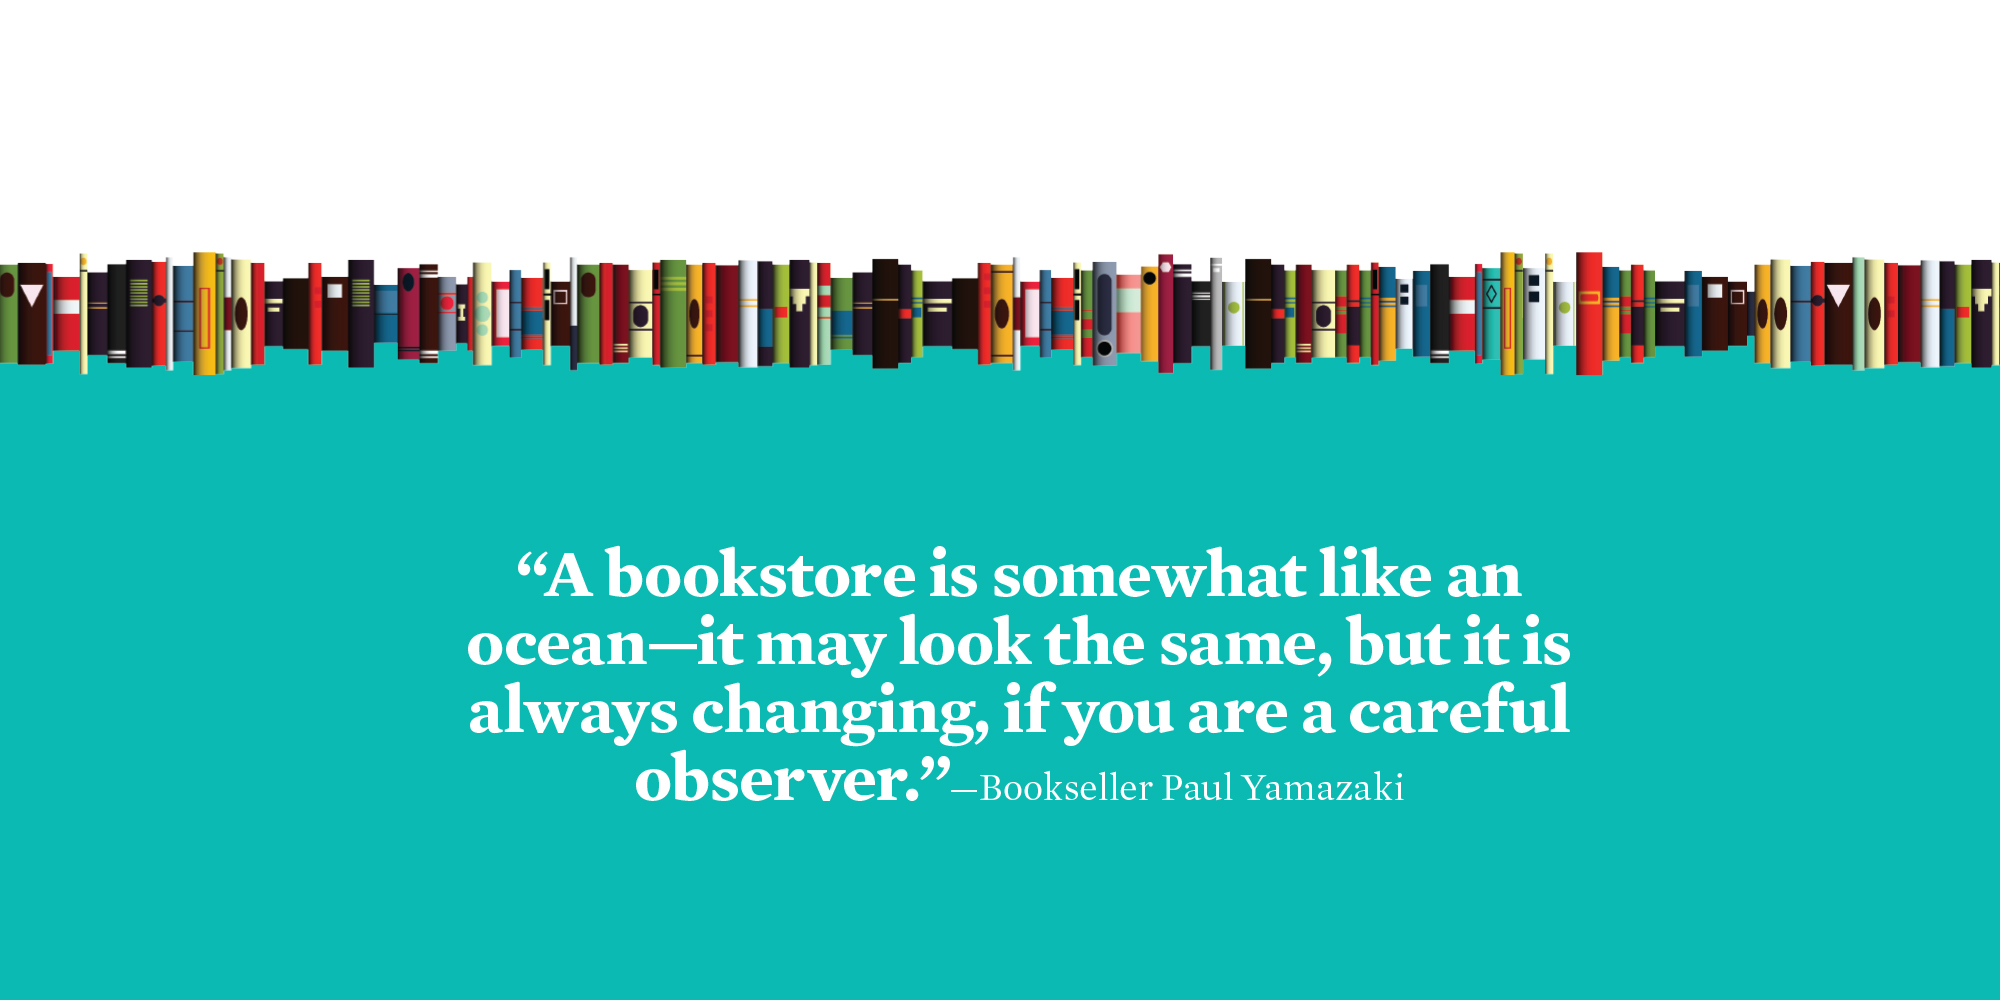 “A bookstore is somewhat like an ocean—it may look the same, but it is always changing, if you are a careful observer.”—Bookseller Paul Yamazaki